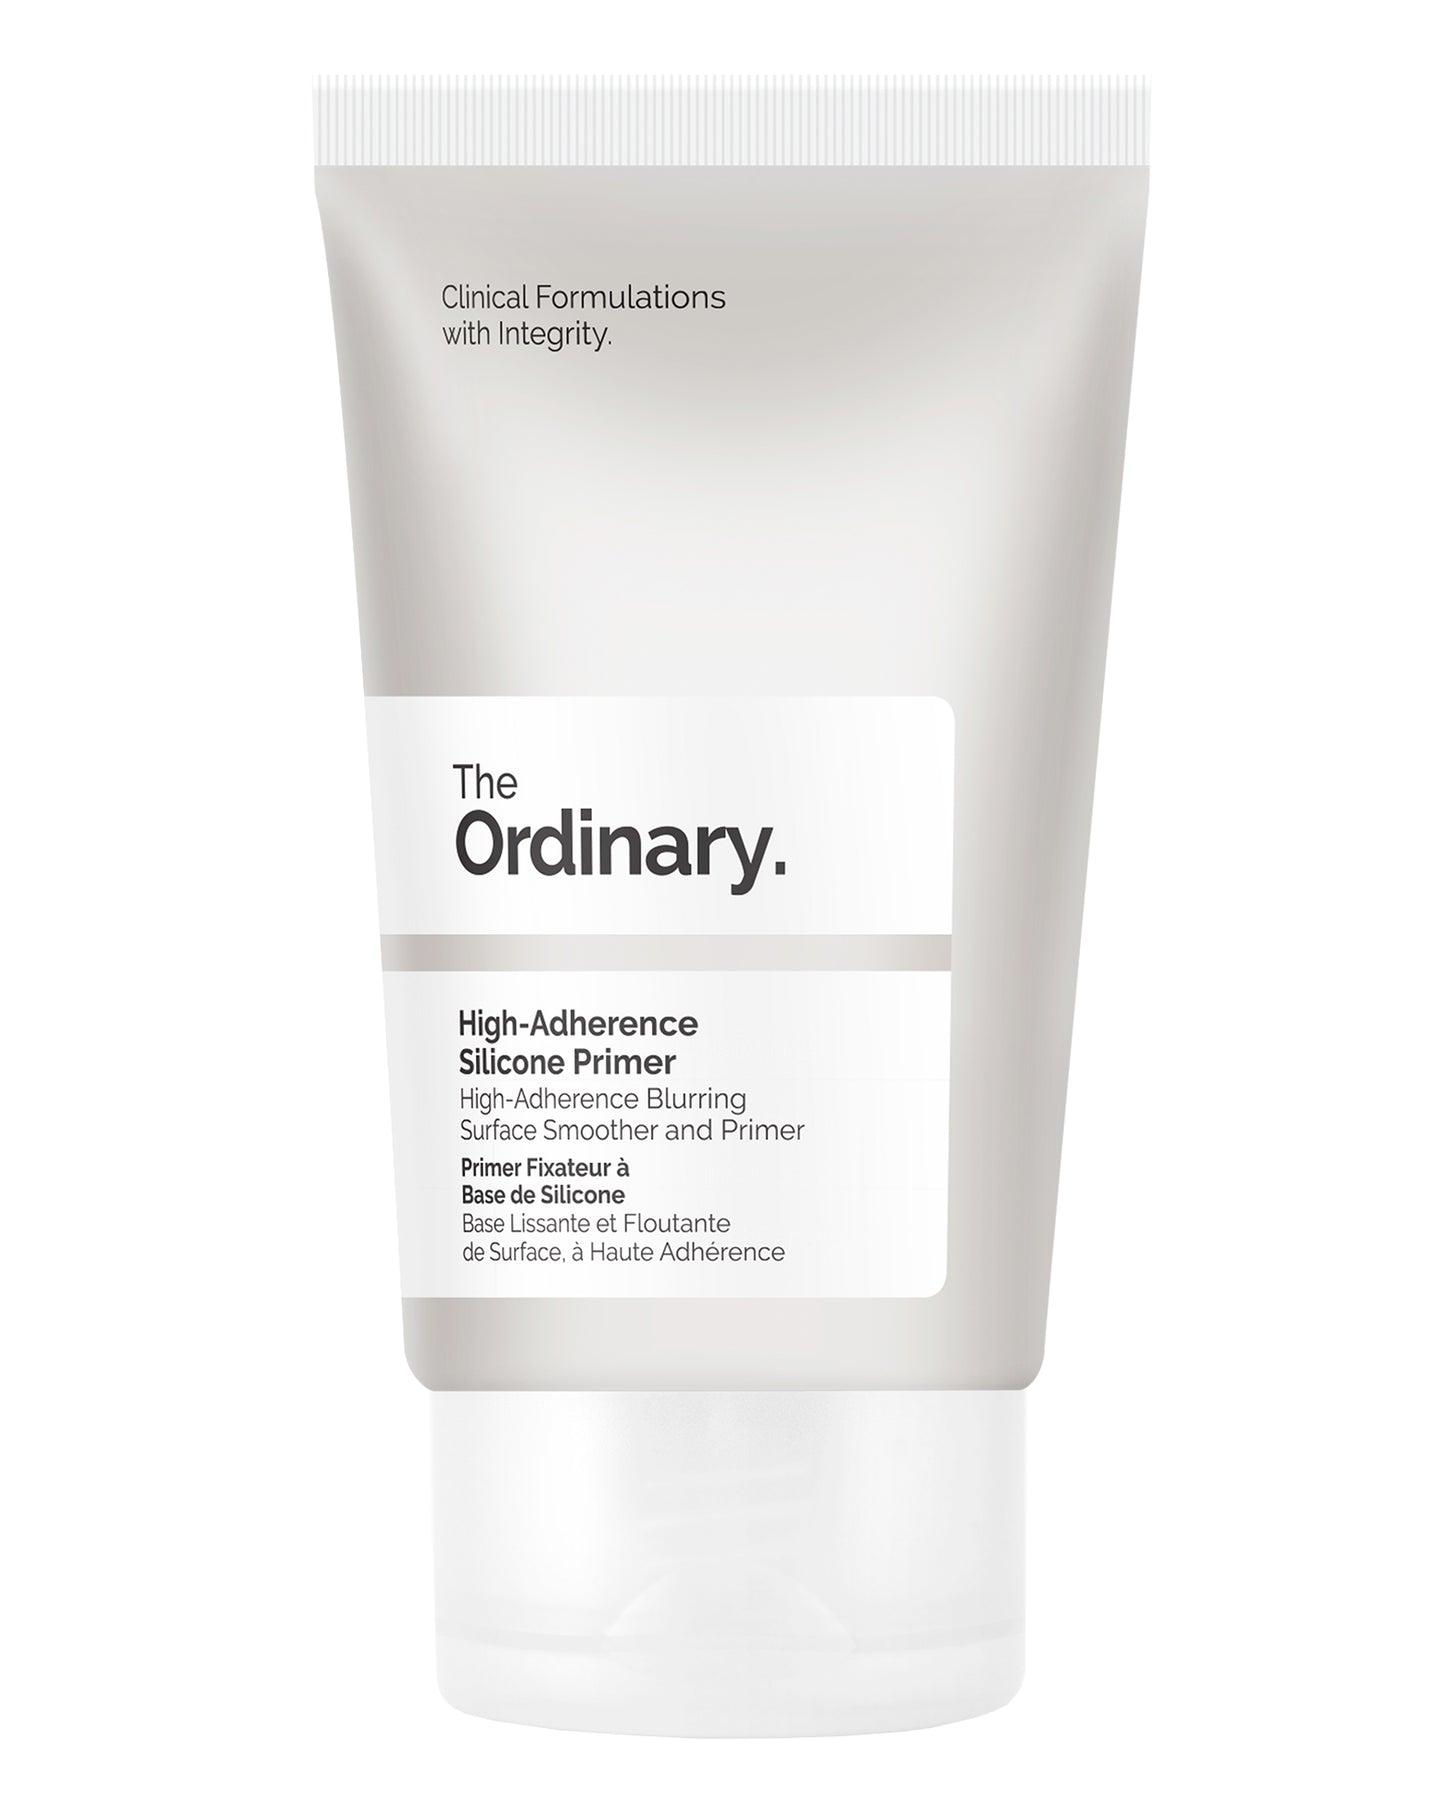 HIGH - ADHERENCE SILICONE PRIMER 30mL